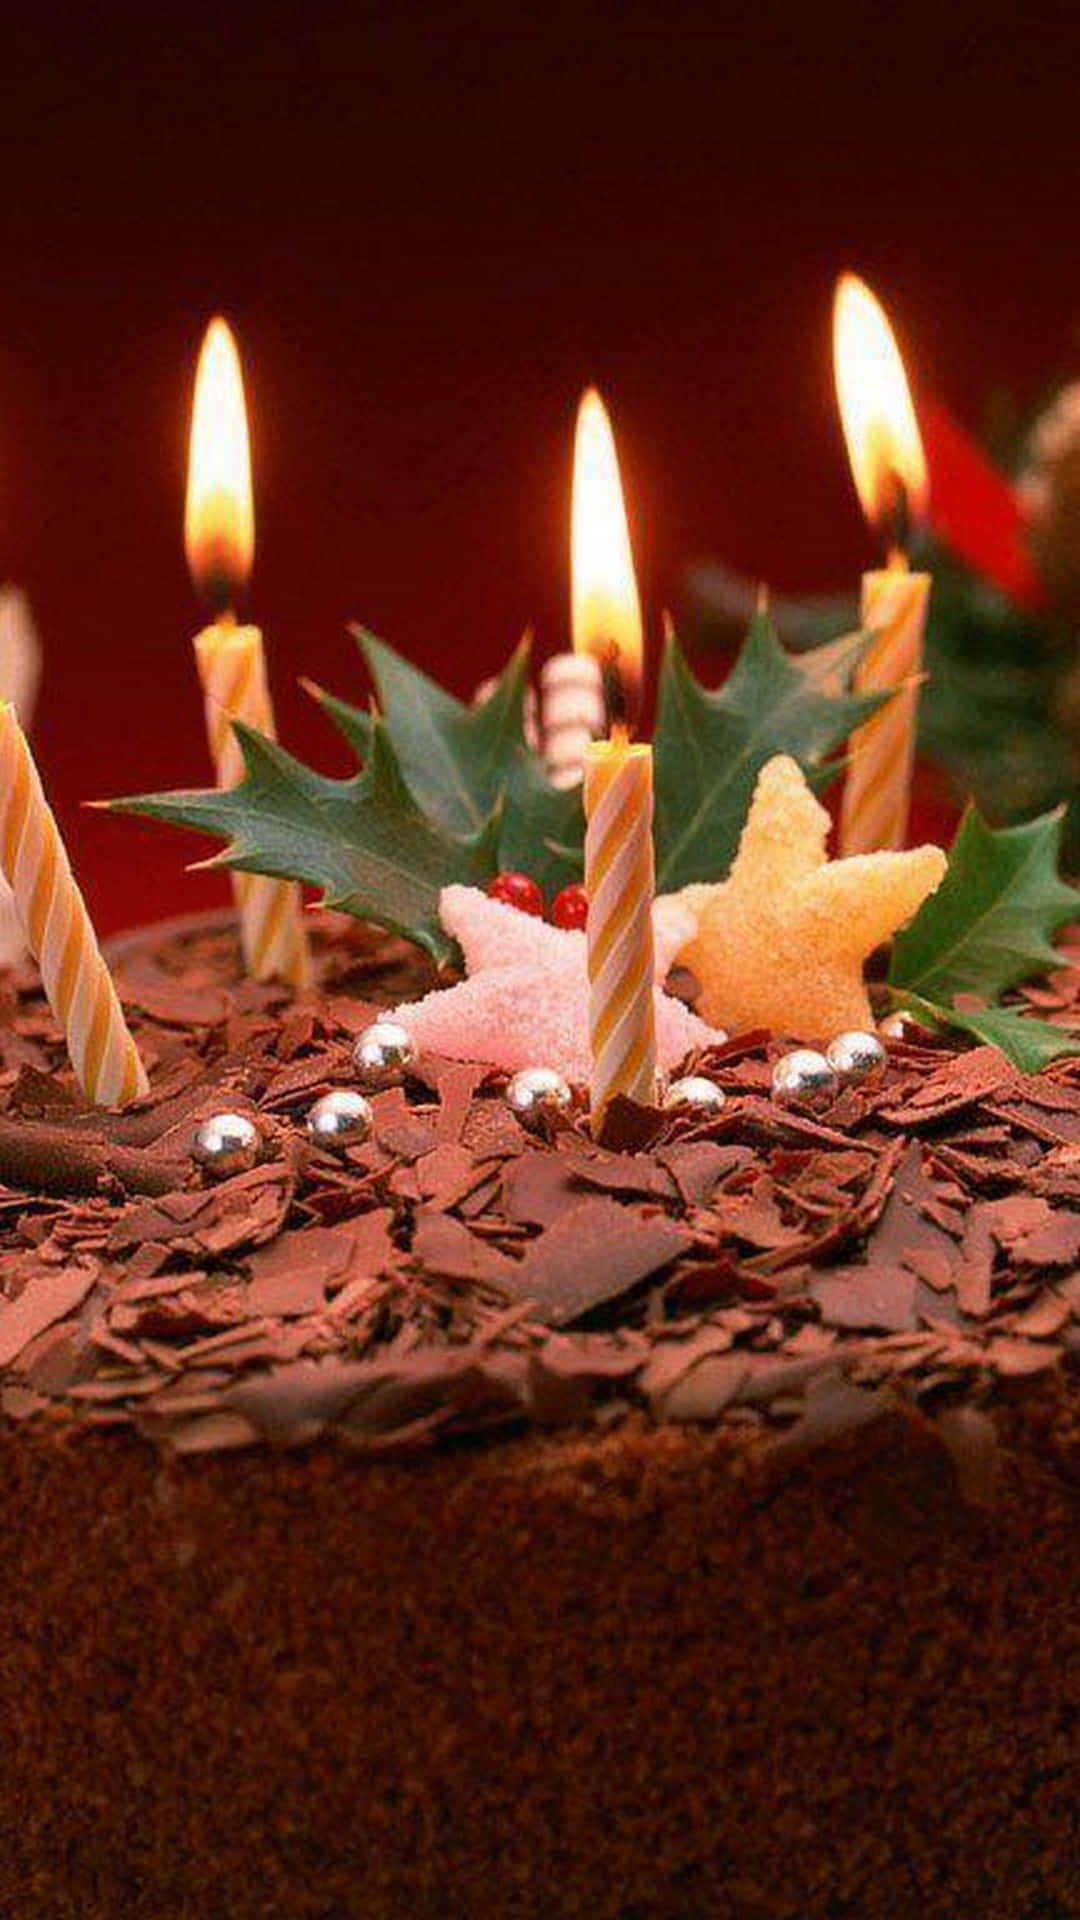 Candles And Chocolate Birthday Cake iPhone Wallpaper